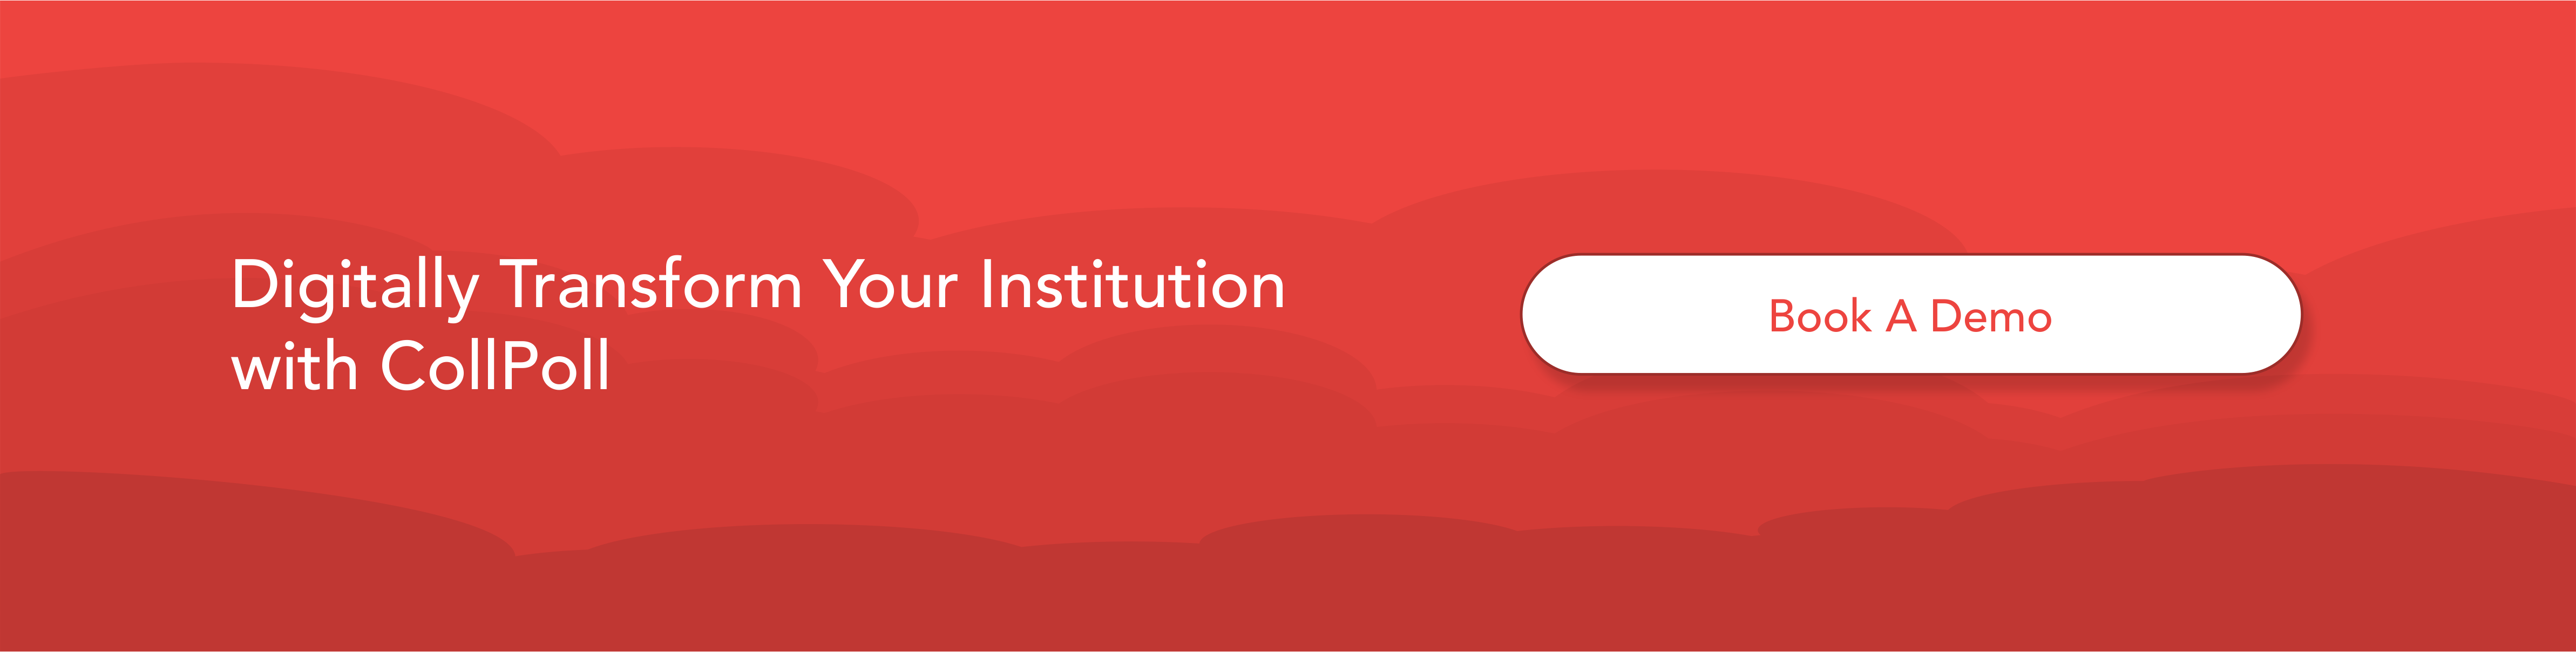 Digital Transformation of Your Institution with CollPoll